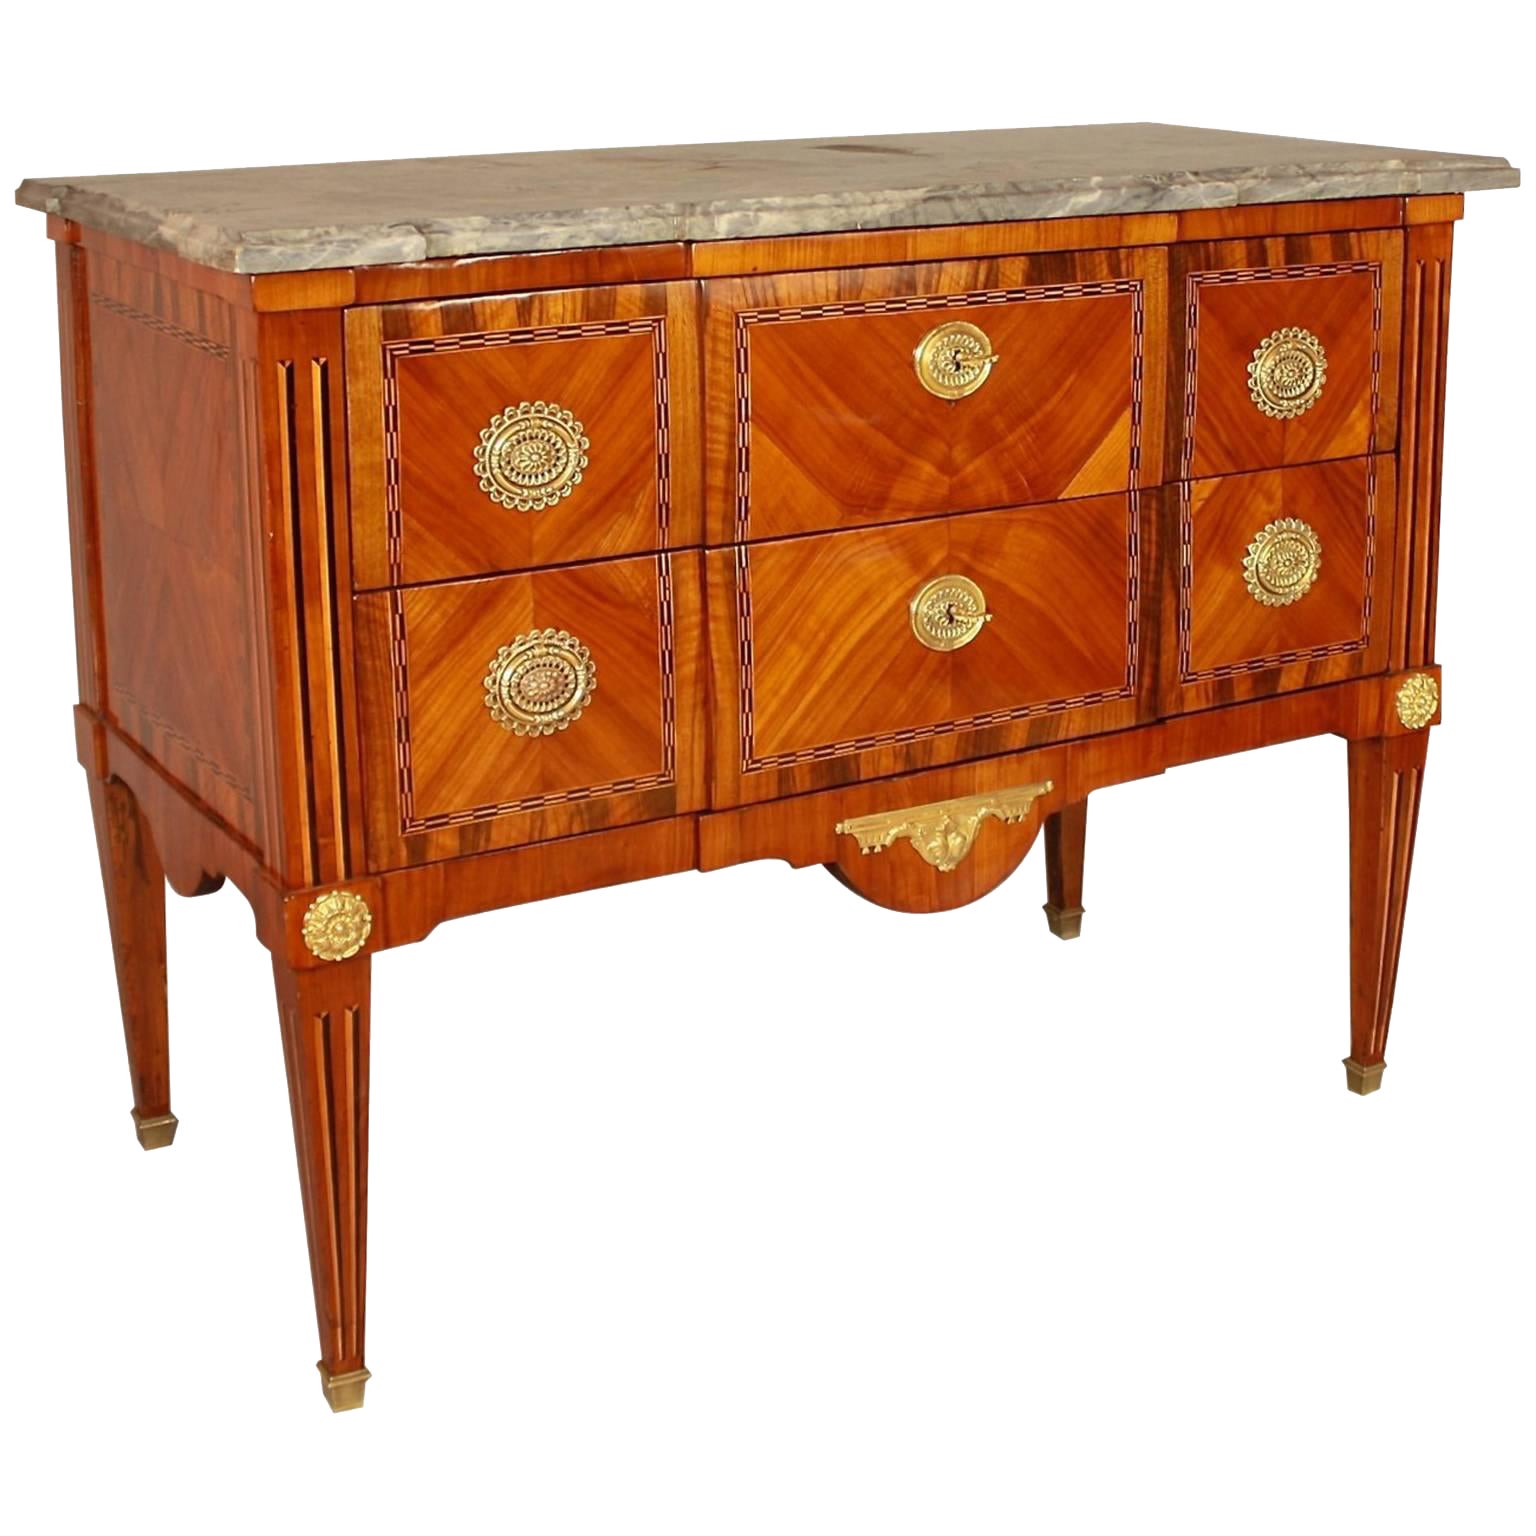 18th Century French Louis XVI Gilt-Bronze Mounted Geometrical Marquetry Commode